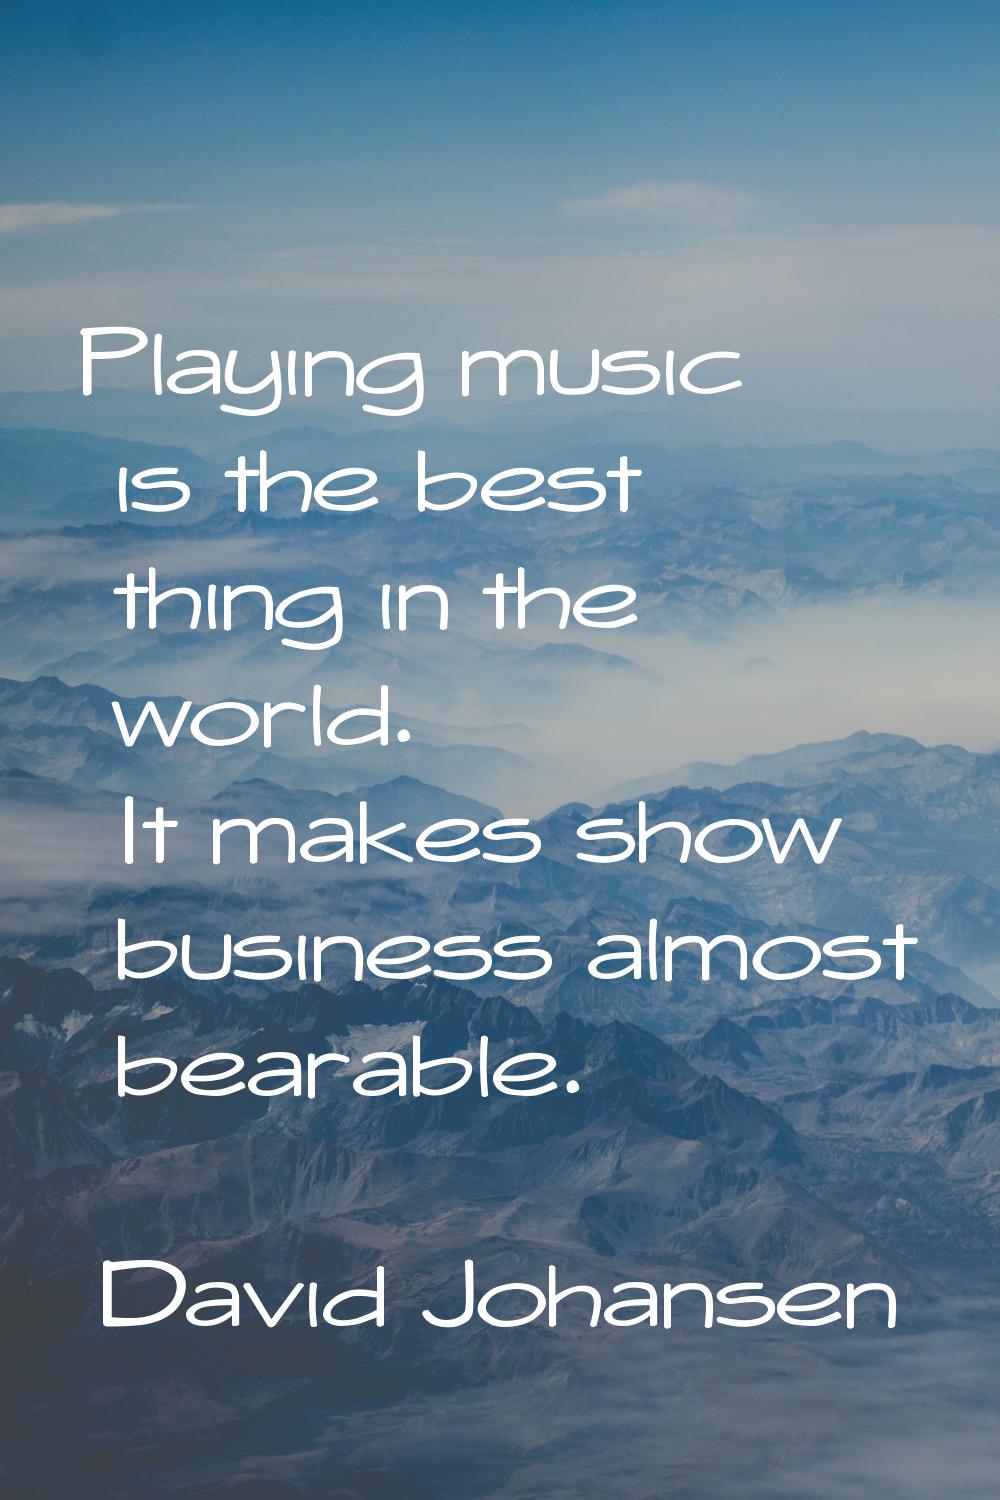 Playing music is the best thing in the world. It makes show business almost bearable.